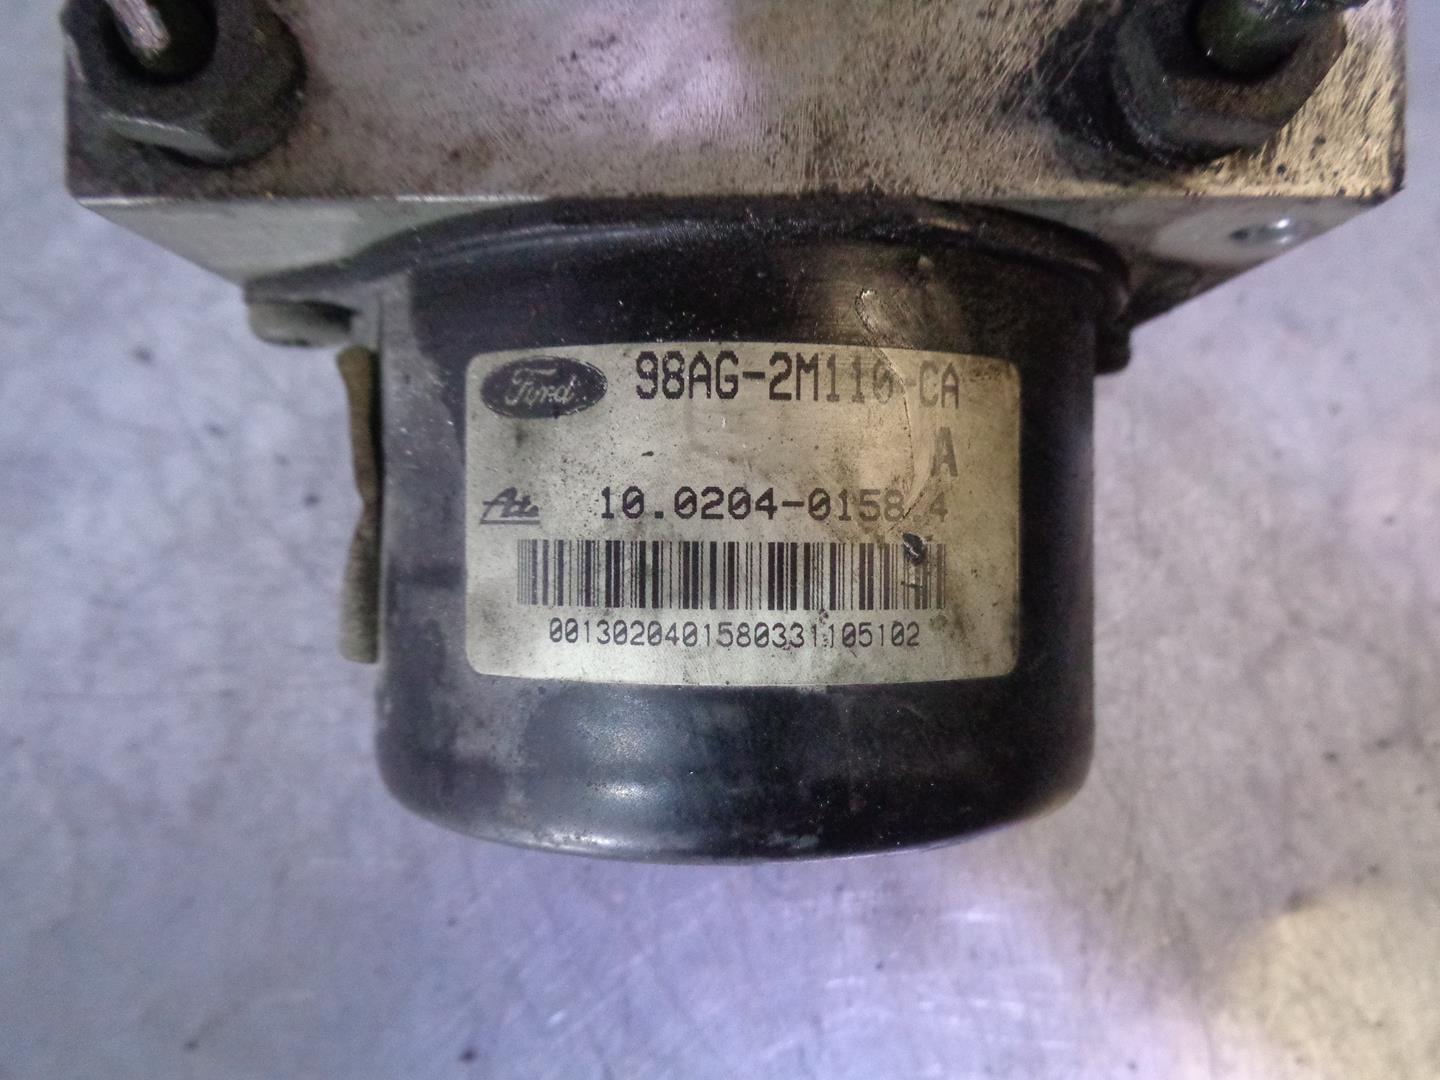 FORD Focus 1 generation (1998-2010) ABS Pump 98AG2M110CA, 10020401584, ATE 24211292